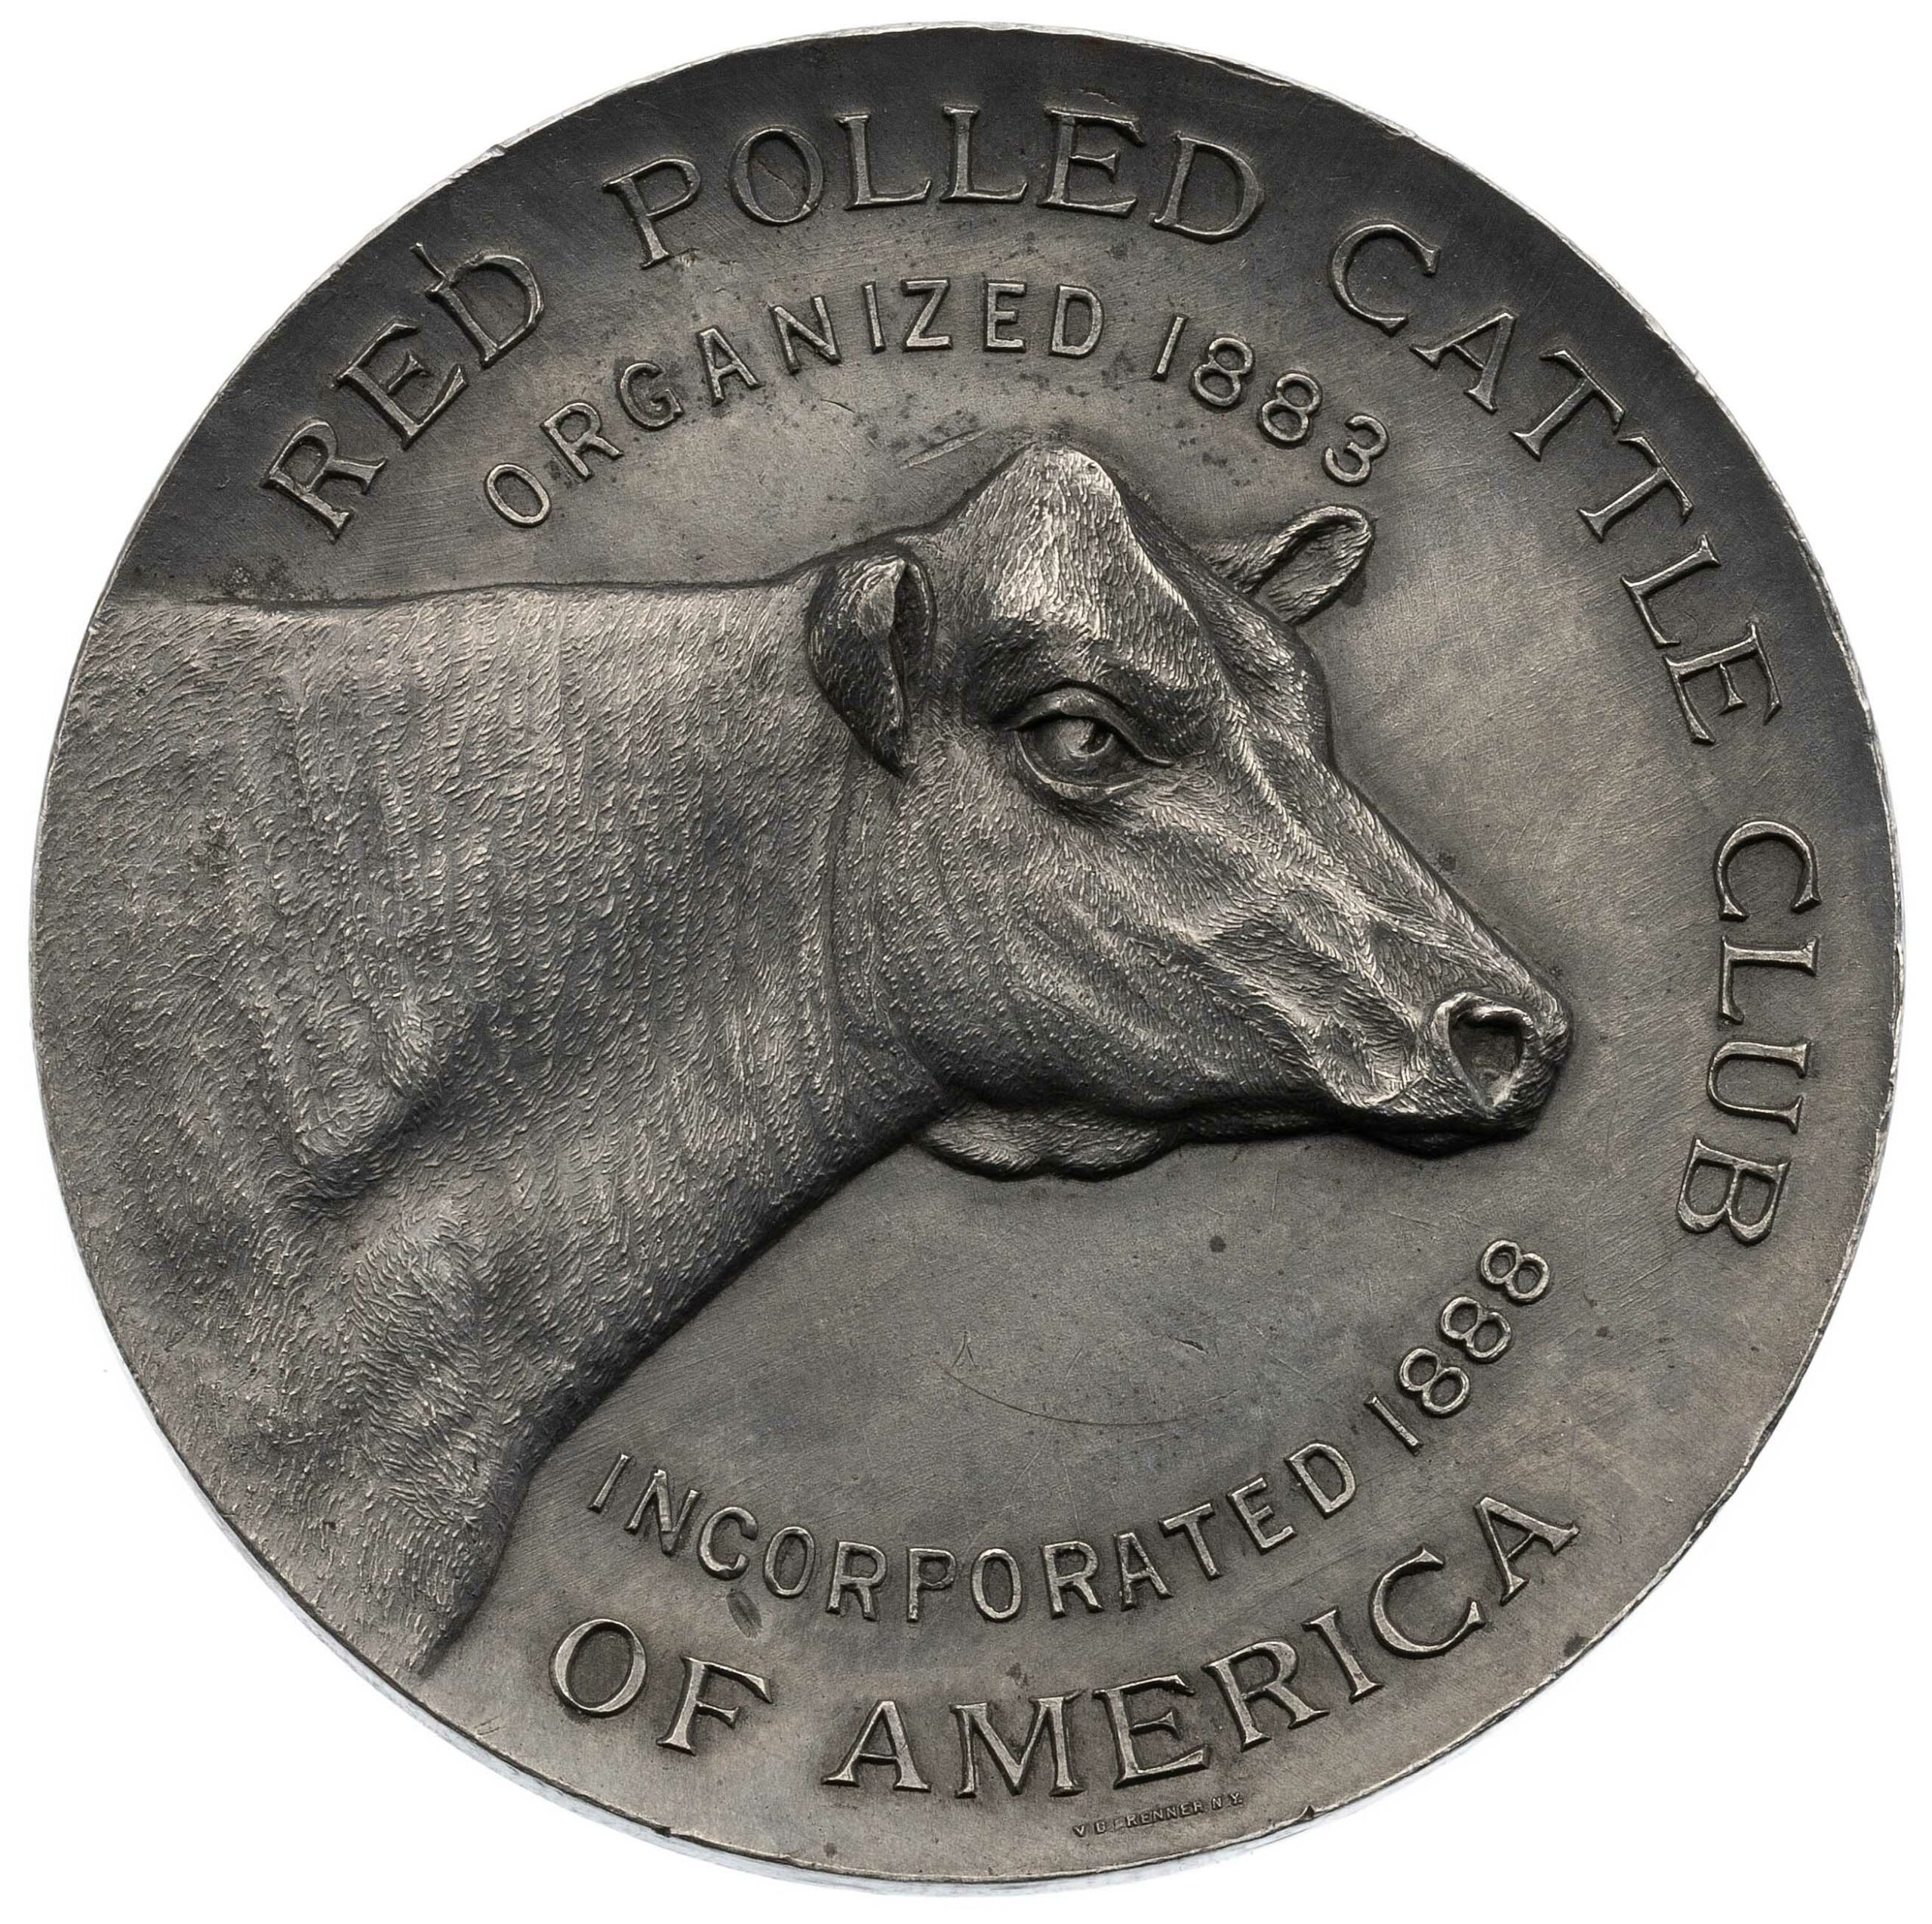 Hahlo-83, Red Polled Cattle Club of America medal